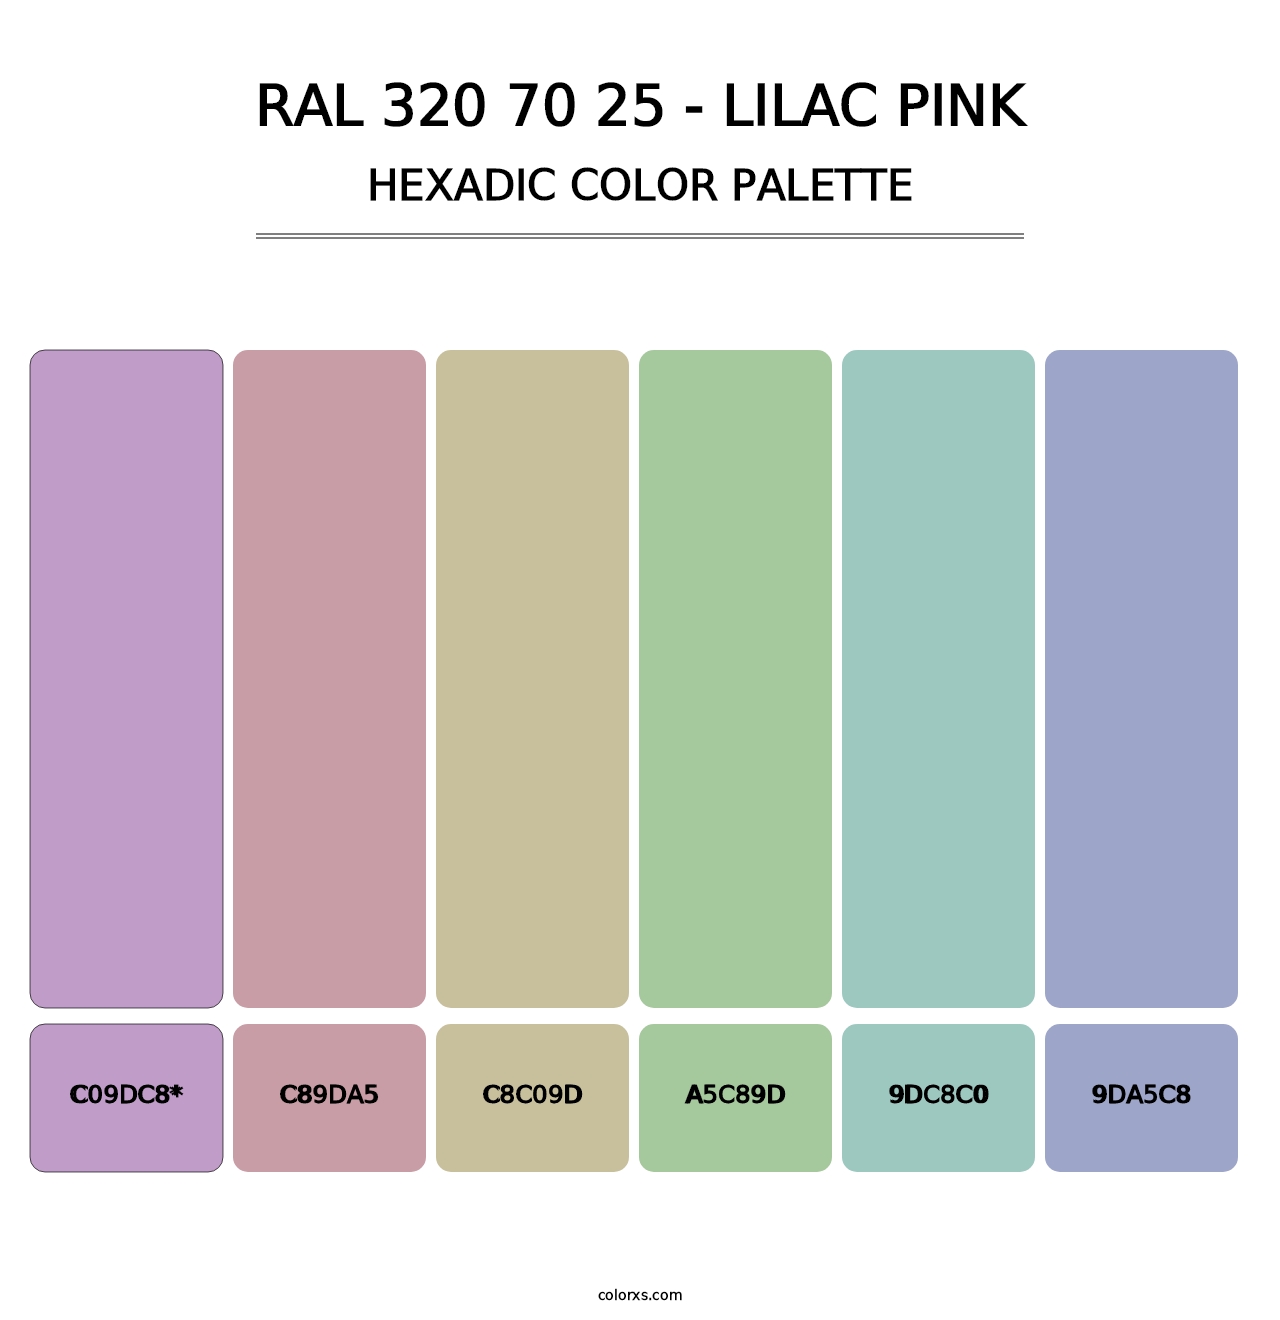 RAL 320 70 25 - Lilac Pink - Hexadic Color Palette